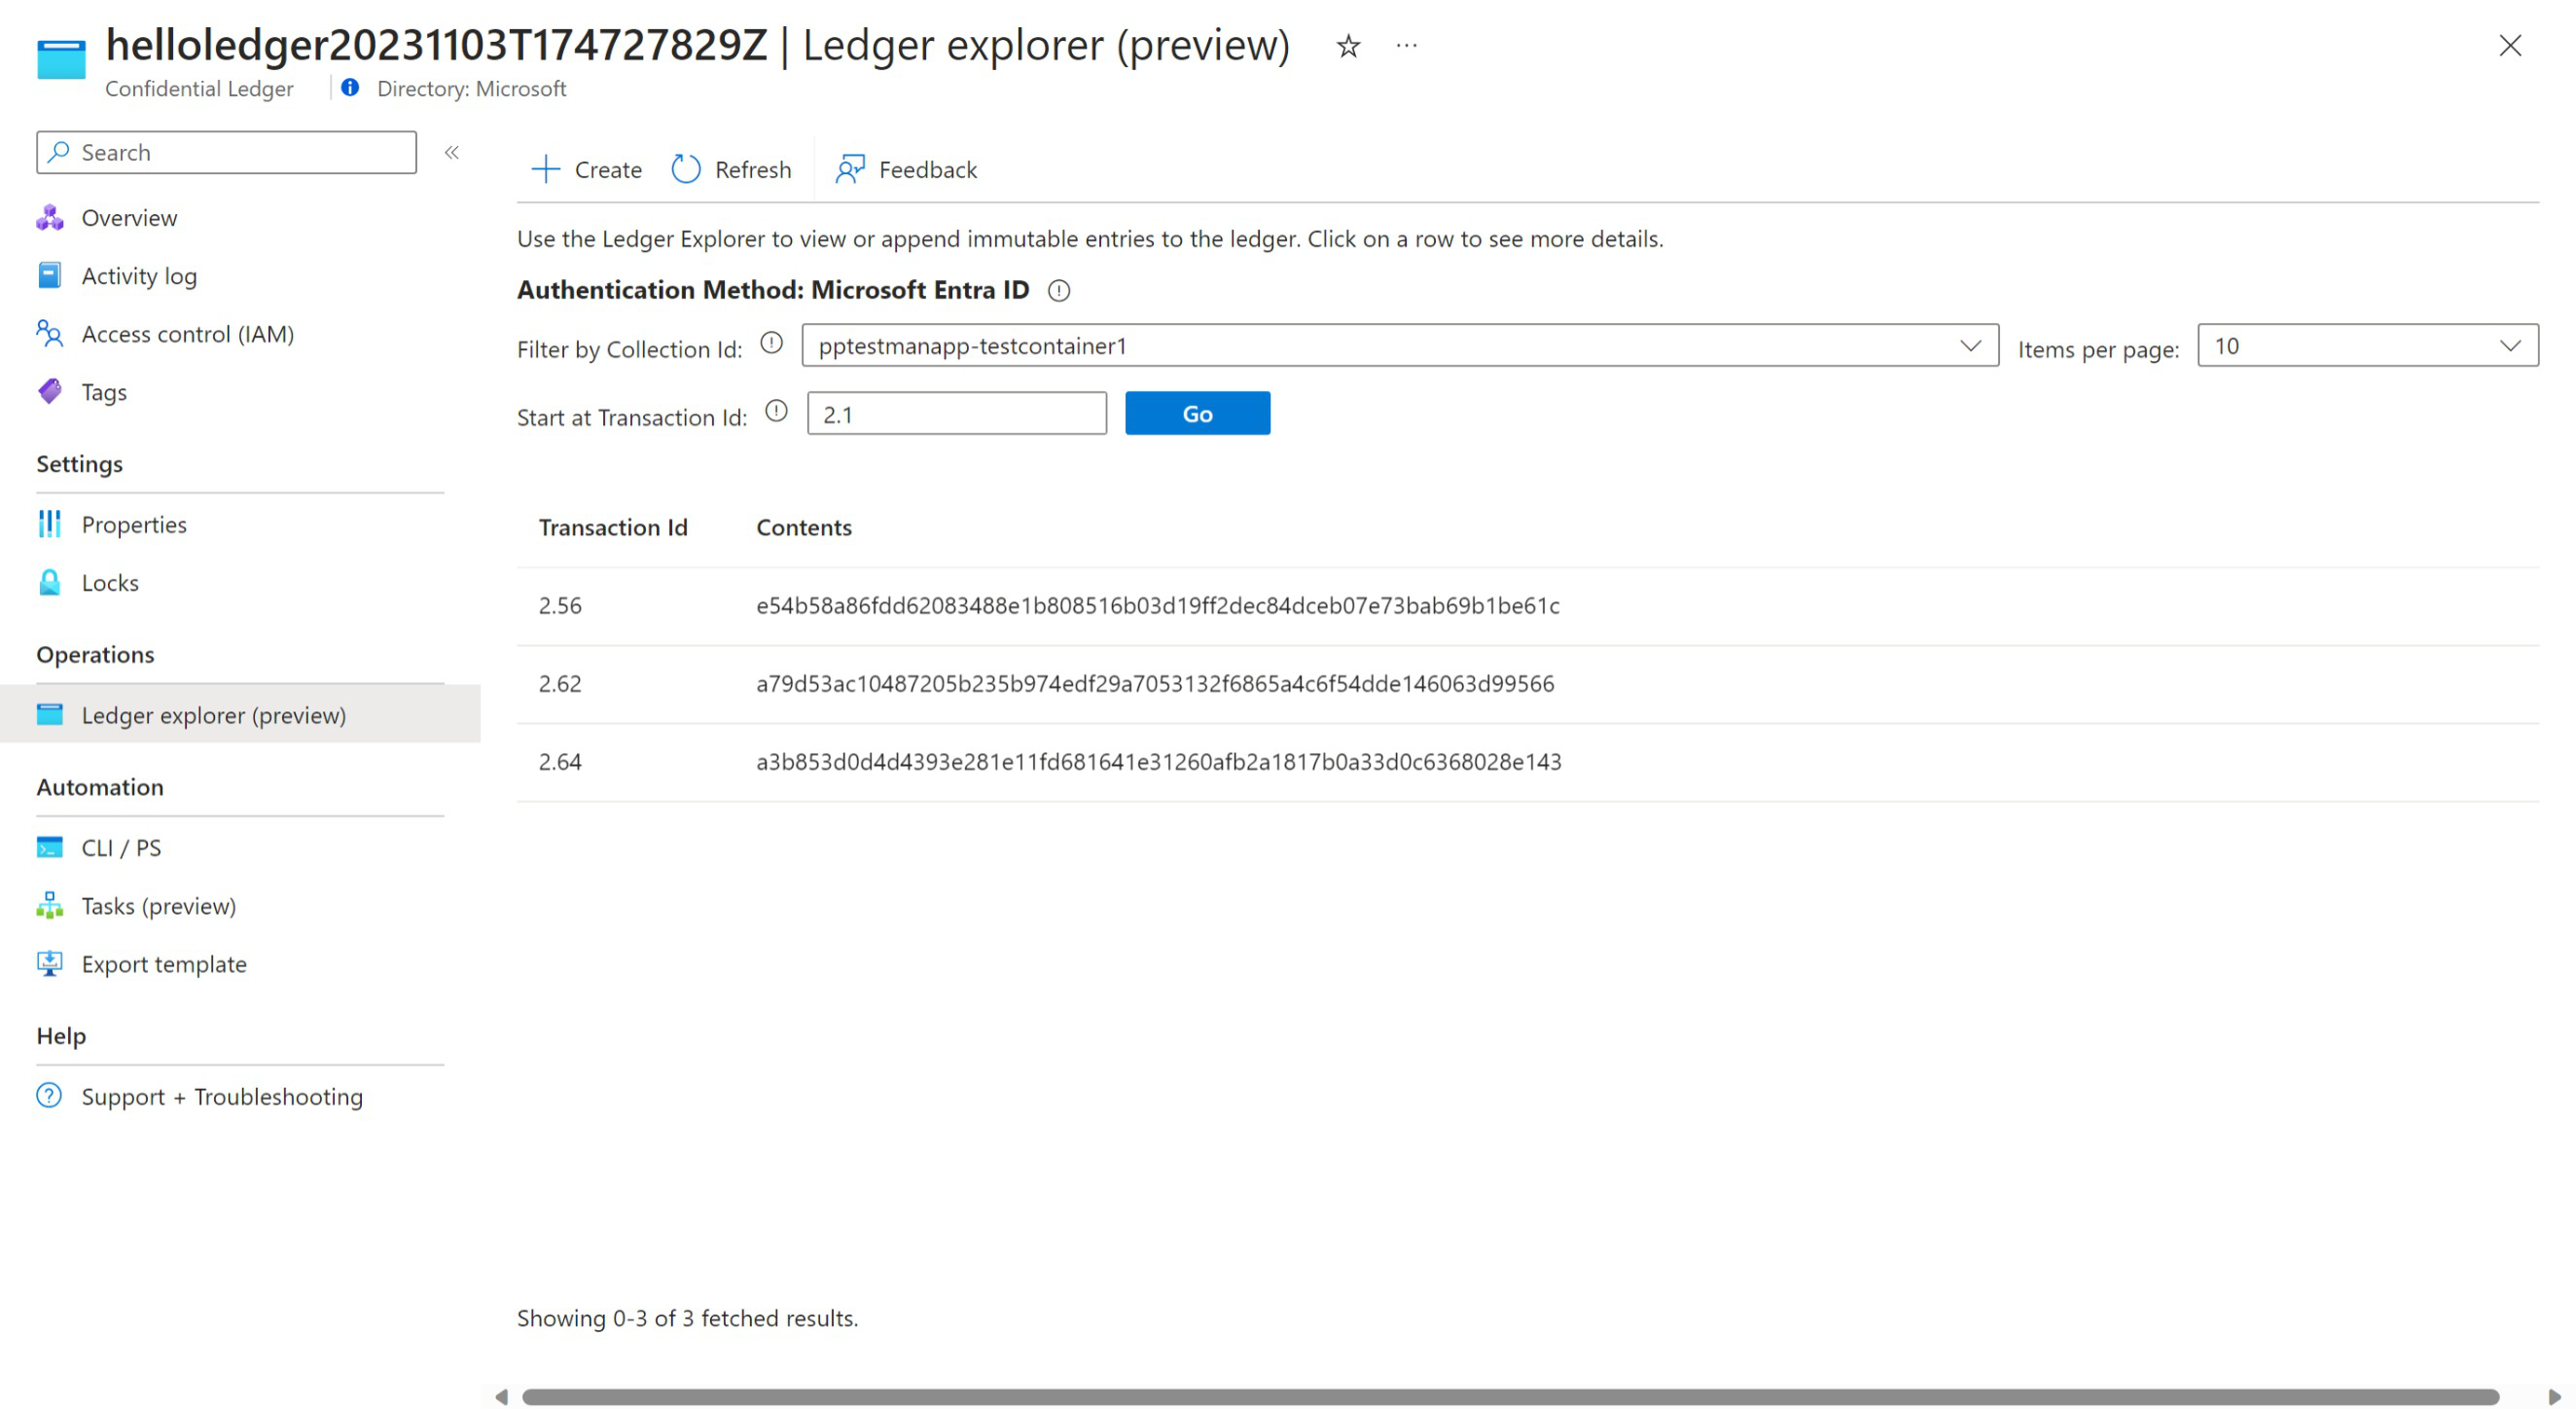 Screenshot of the Azure portal in a web browser, showing the Azure Confidential Ledger explorer with digest transactions.